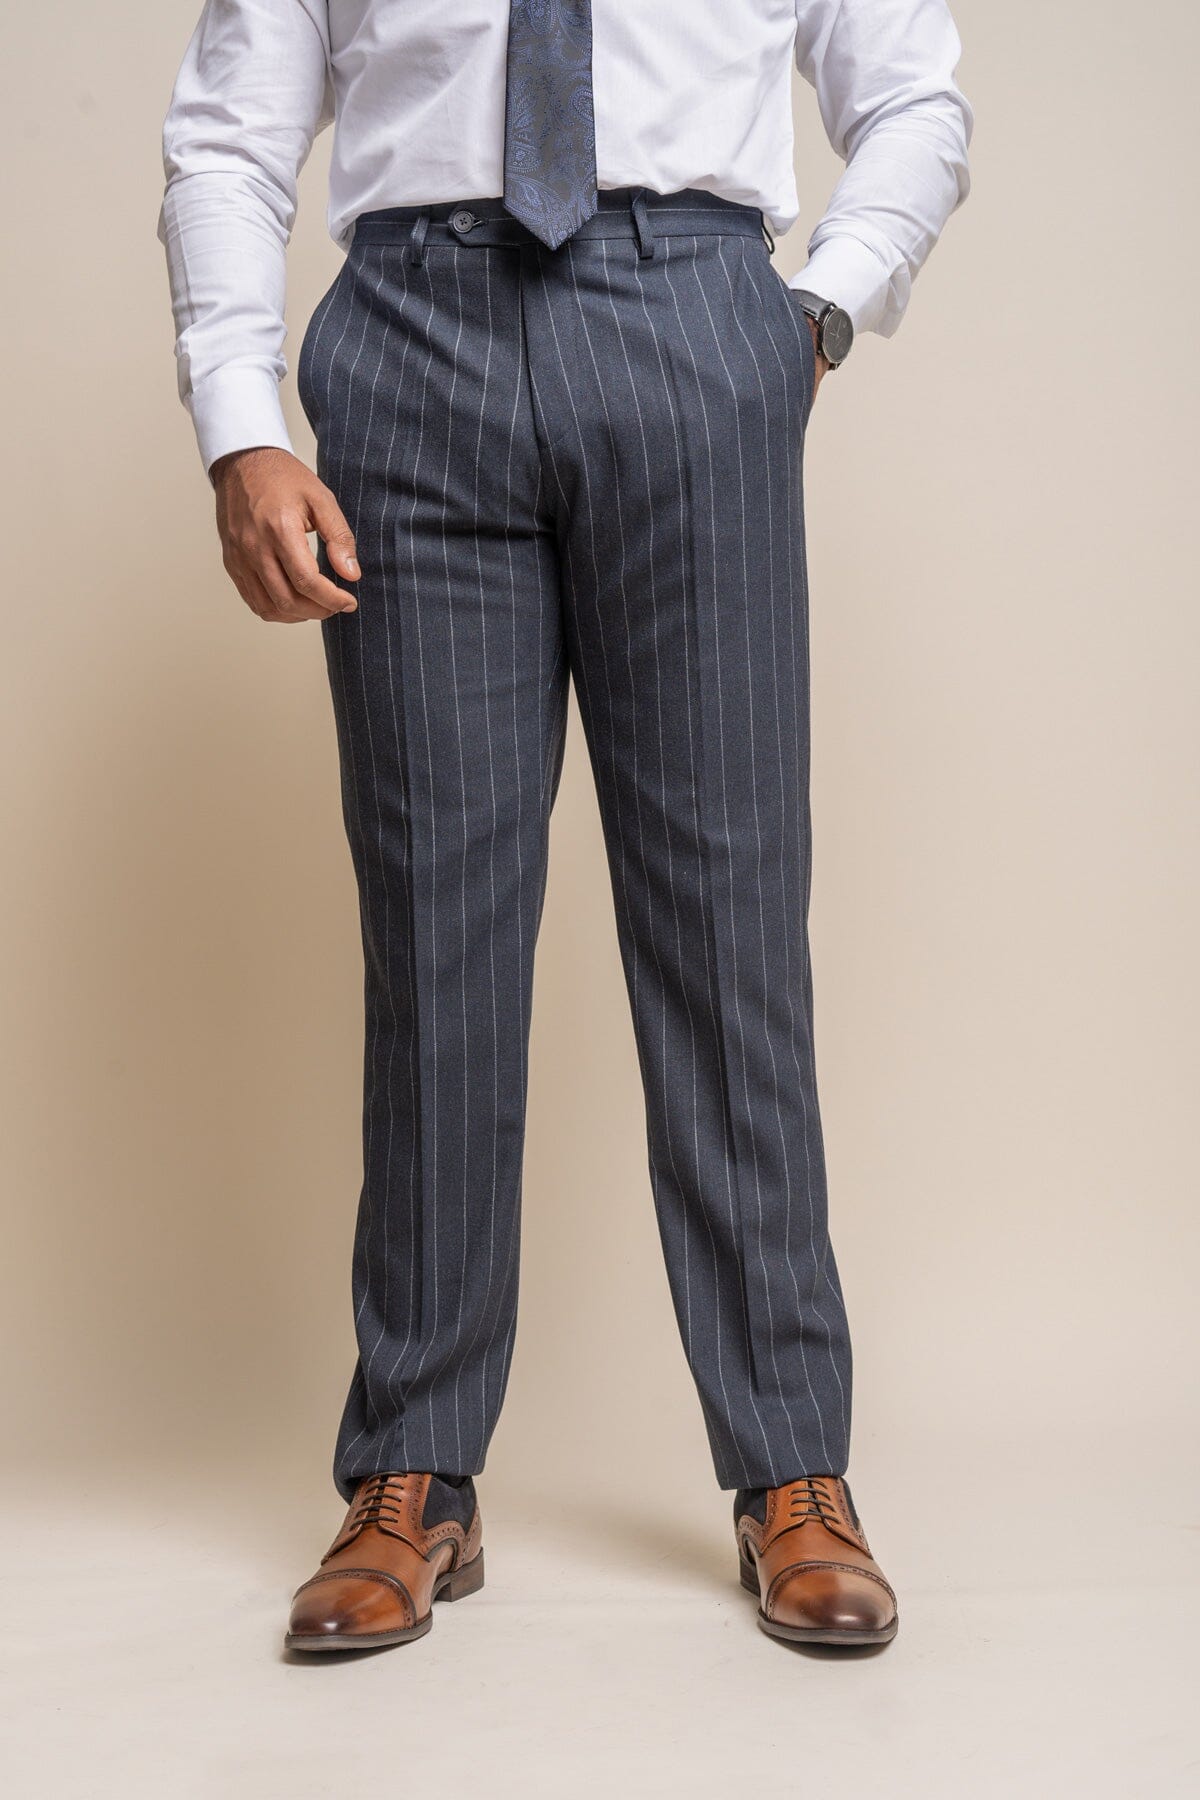 Invincible Navy Pinstripe Trousers - Trousers - 